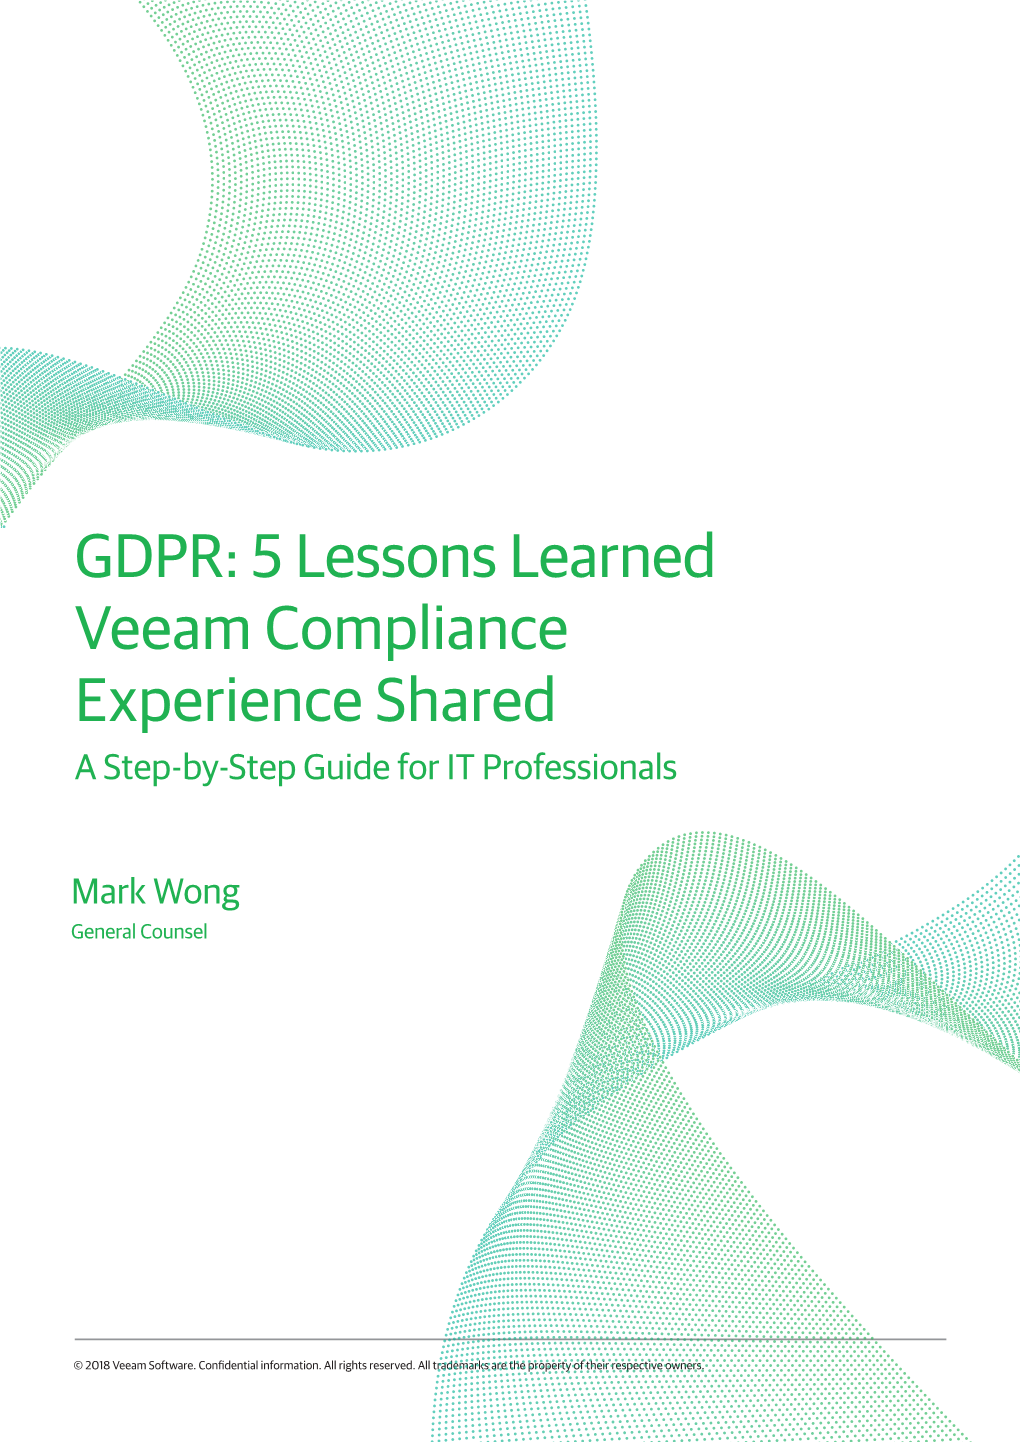 GDPR: 5 Lessons Learned Veeam Compliance Experience Shared a Step-By-Step Guide for IT Professionals